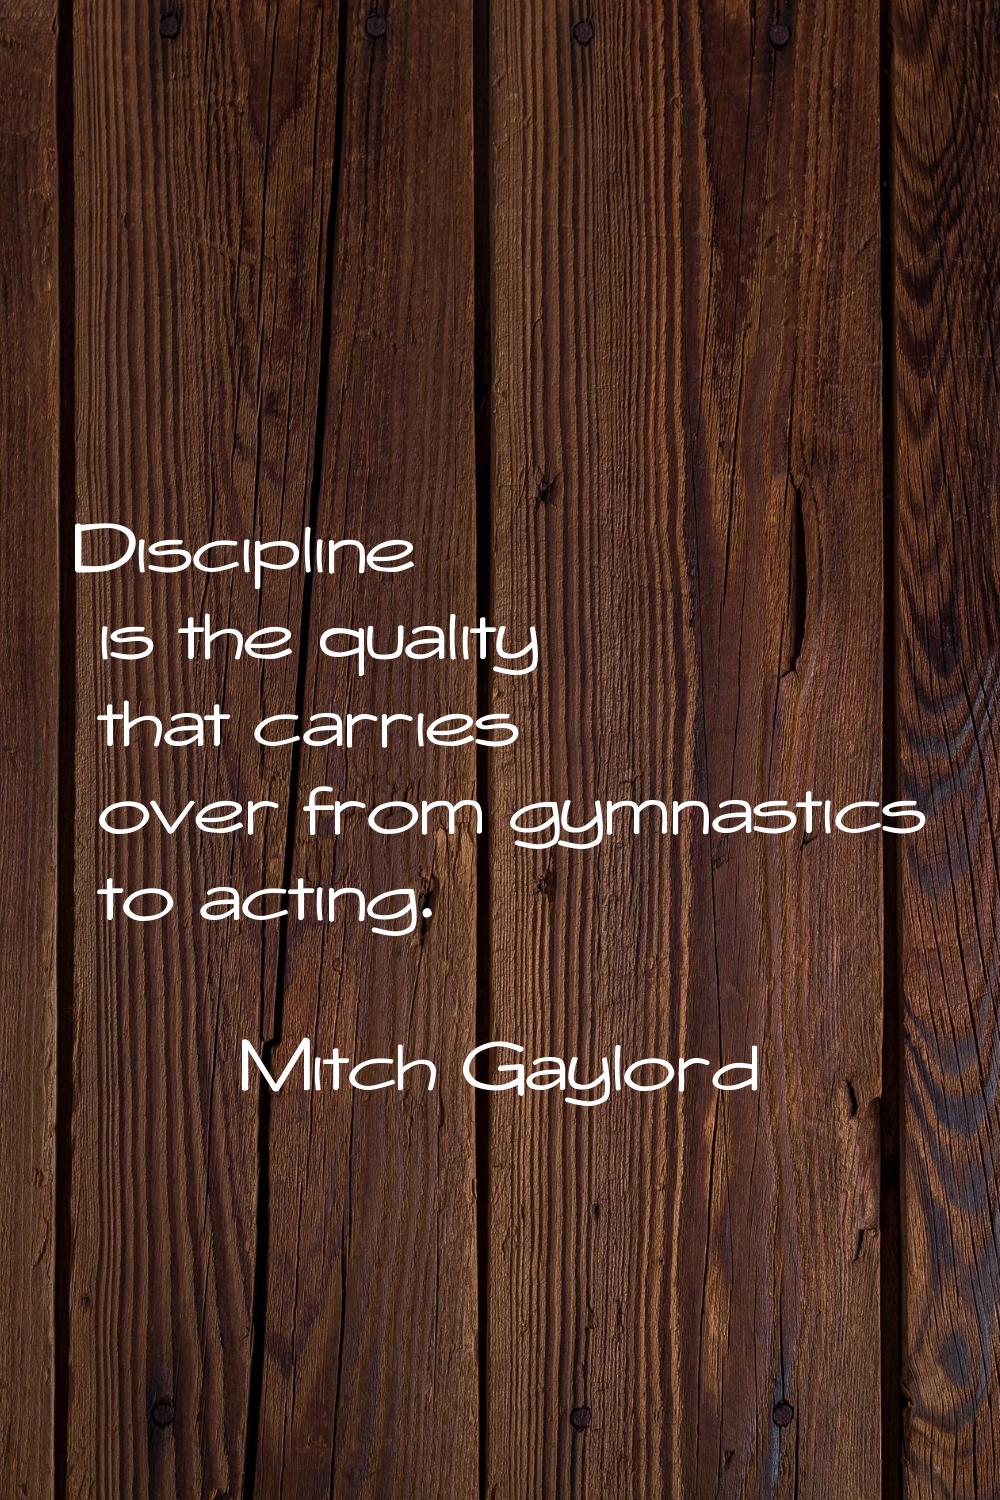 Discipline is the quality that carries over from gymnastics to acting.